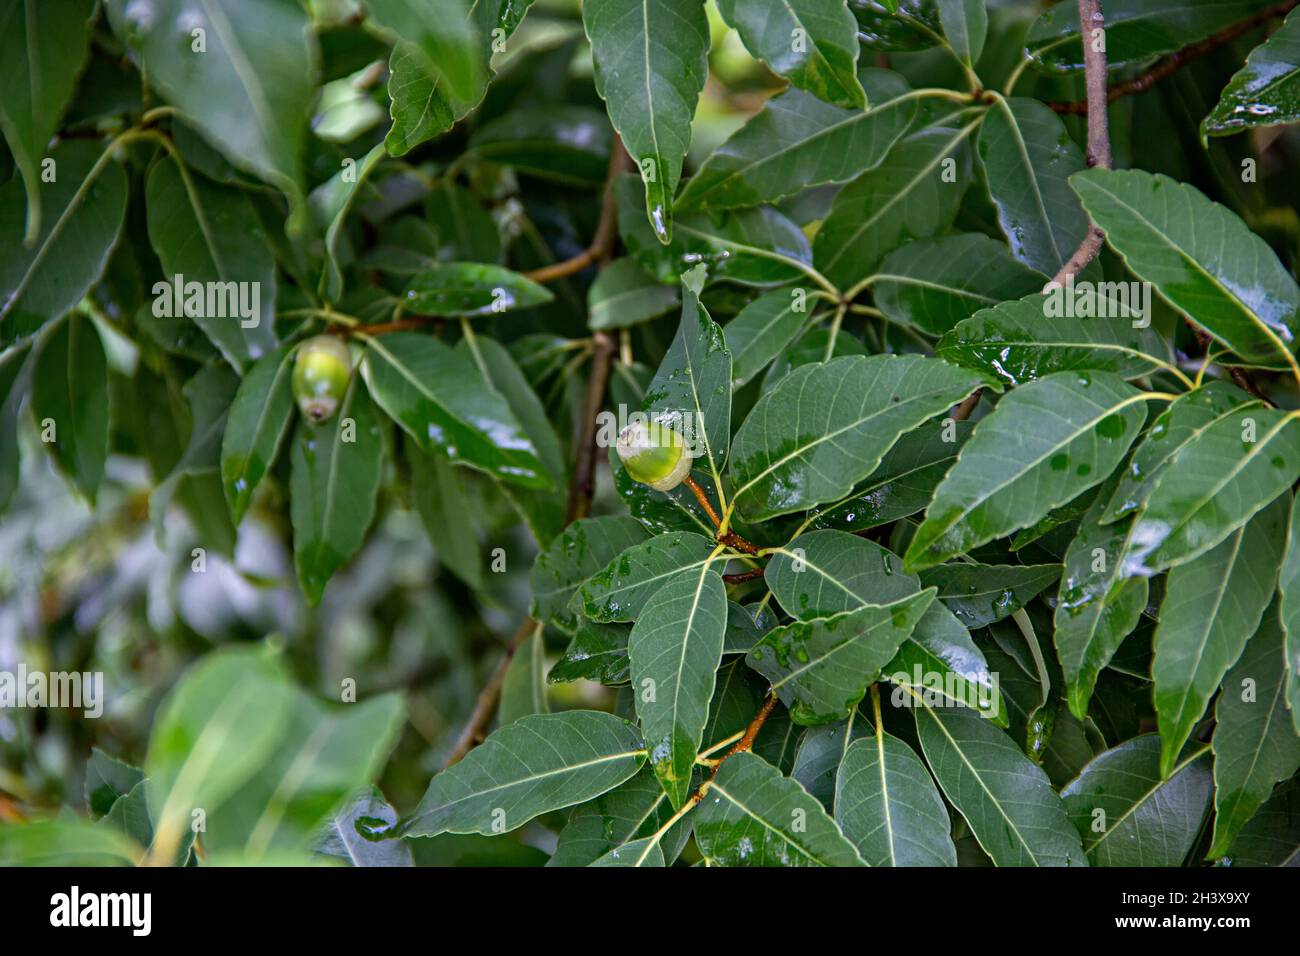 Close-up of green leaves and acorns of Quercus myrsinifolia, commonly called Chinese ring-cupped oak or Japanese white Oak in Sochi arboretum Stock Photo